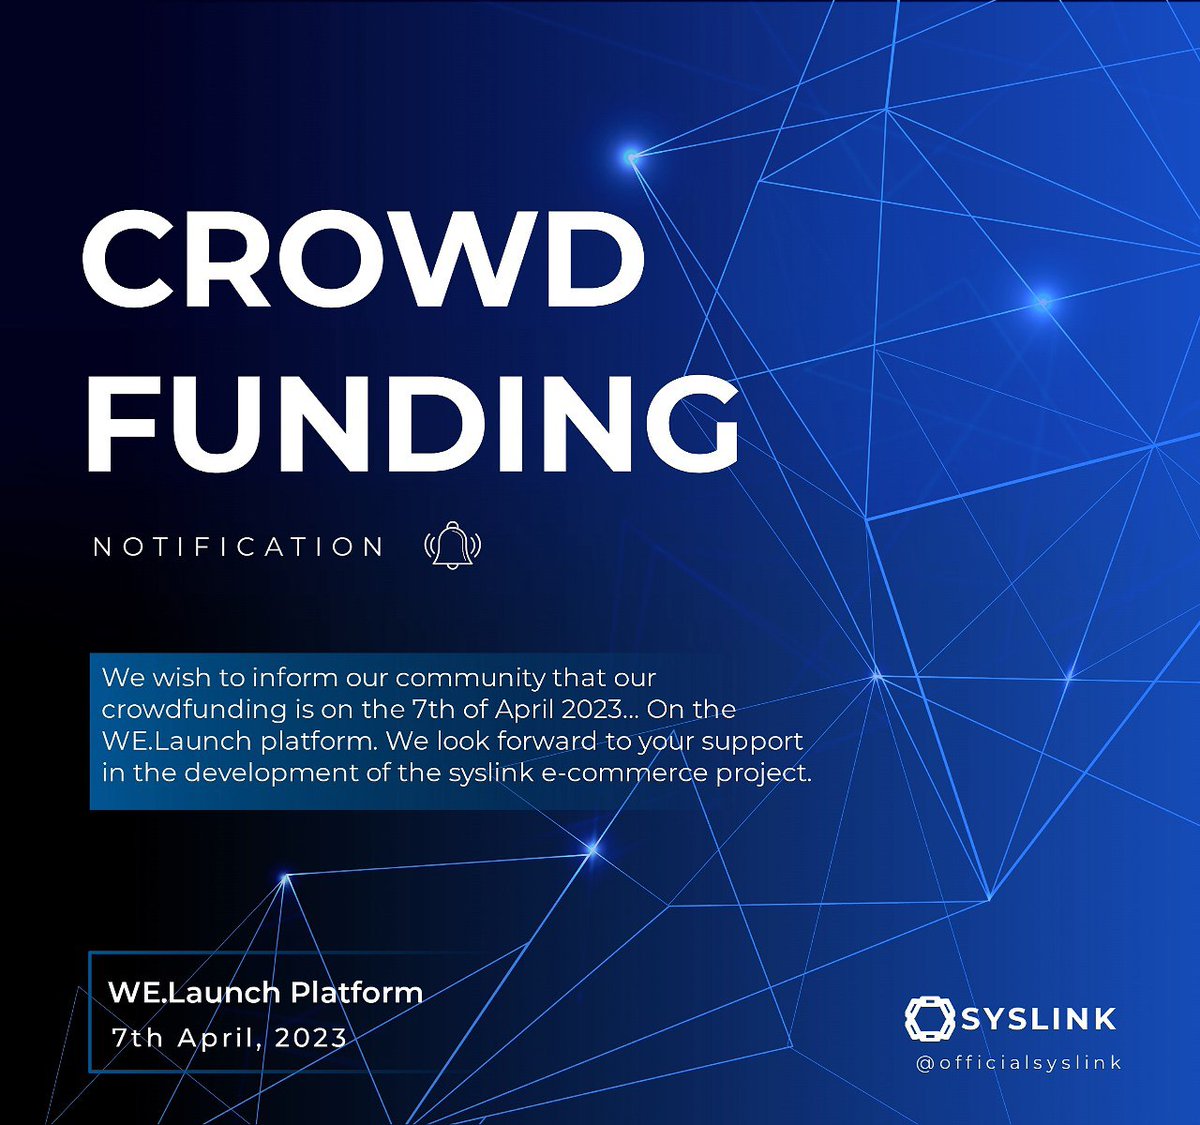 Dear valued members of our community,

We are excited to announce that the crowdfunding for the development of the SysLink E-commerce platform will be held on the Welaunch platform on the 7th of April 2023. #Weconomy #Syscoin #ecommerce